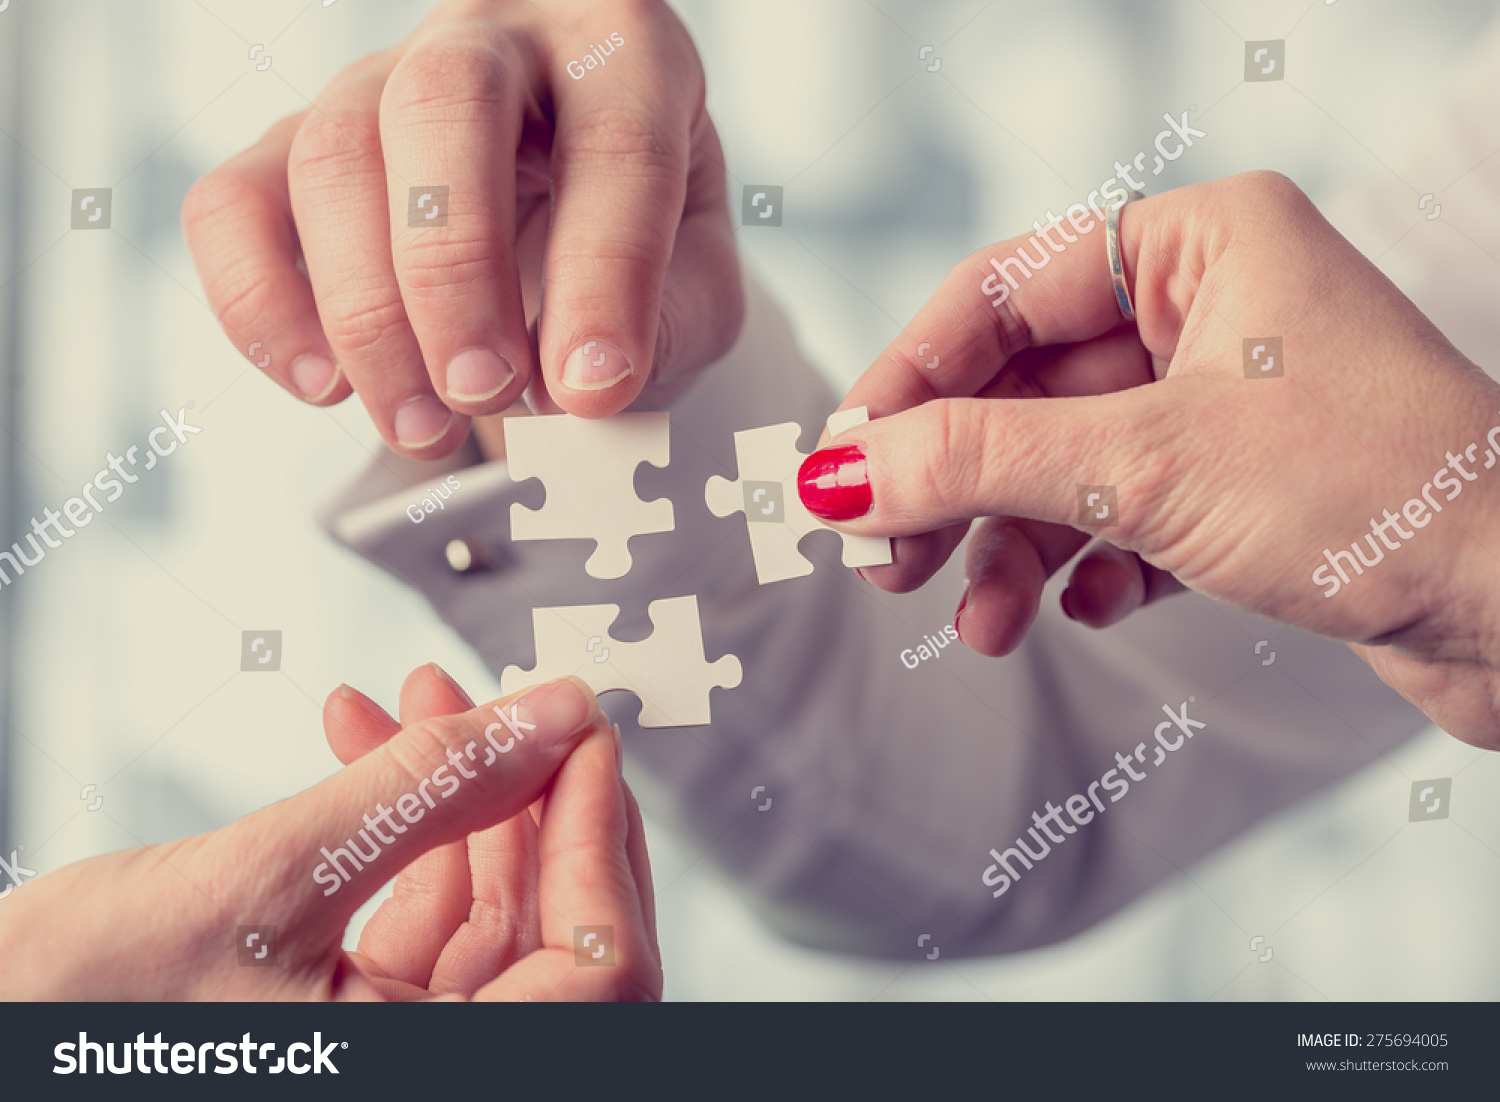 Hands of different people matching together three complementary puzzle pieces, concept of unity and problem solving, close-up with retro filter effect. #275694005